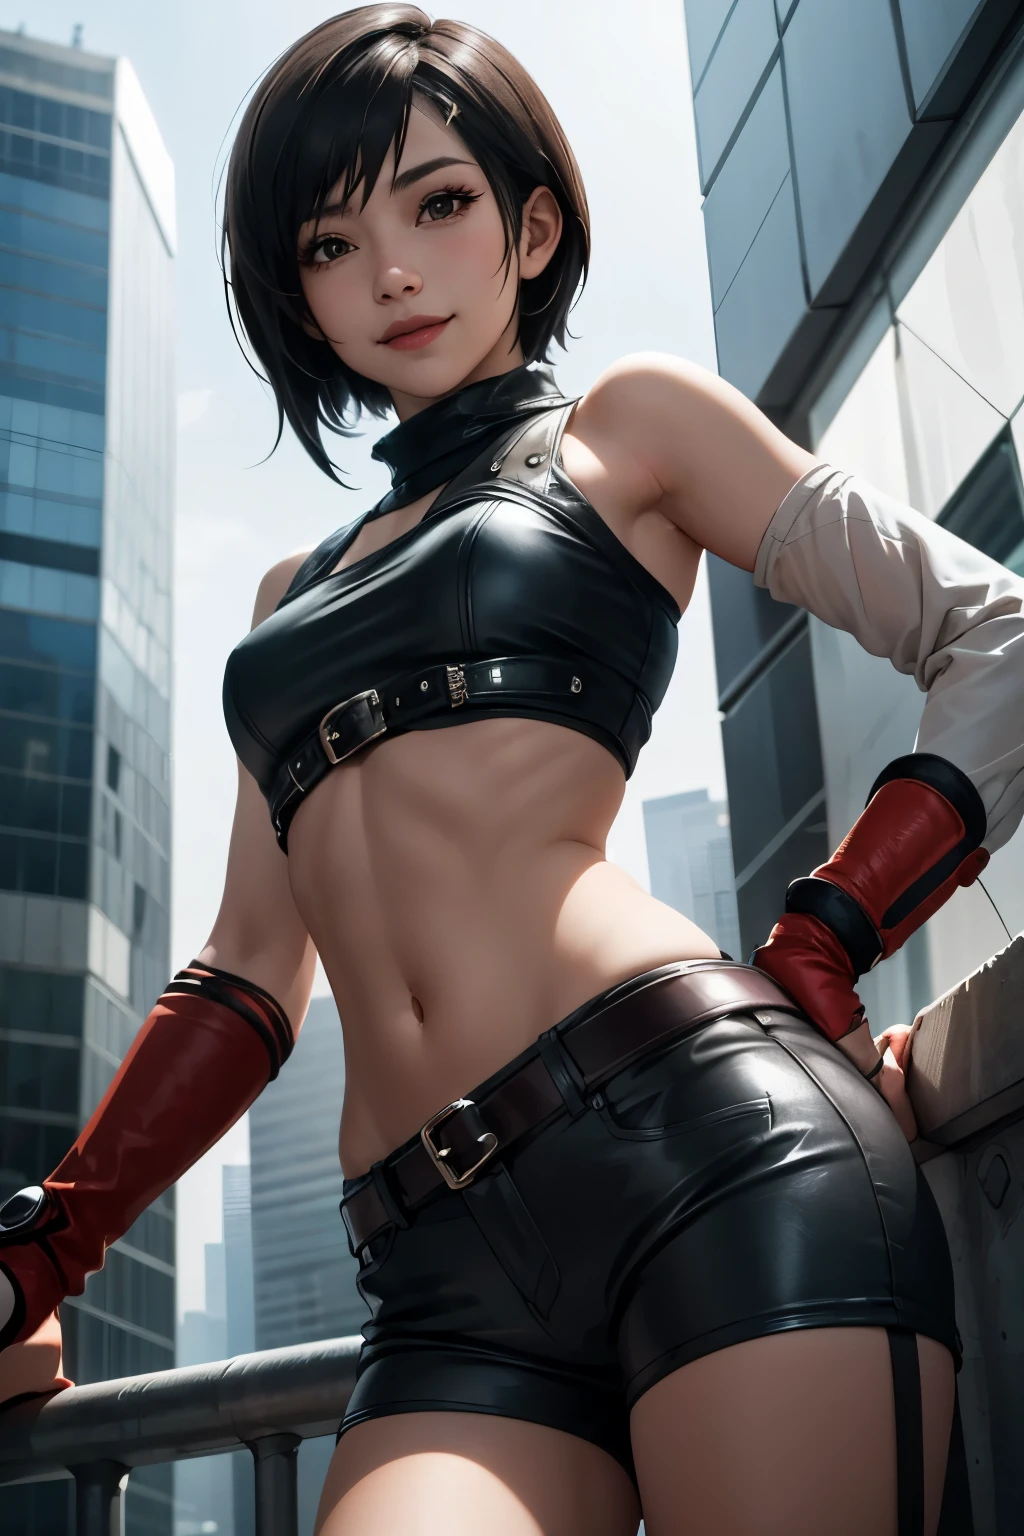 FF7 Yuffie, looking at me, -like, high resolution, smiling, blushing, belly button exposed, black leather belt hot pants, skyscrapers, background blur